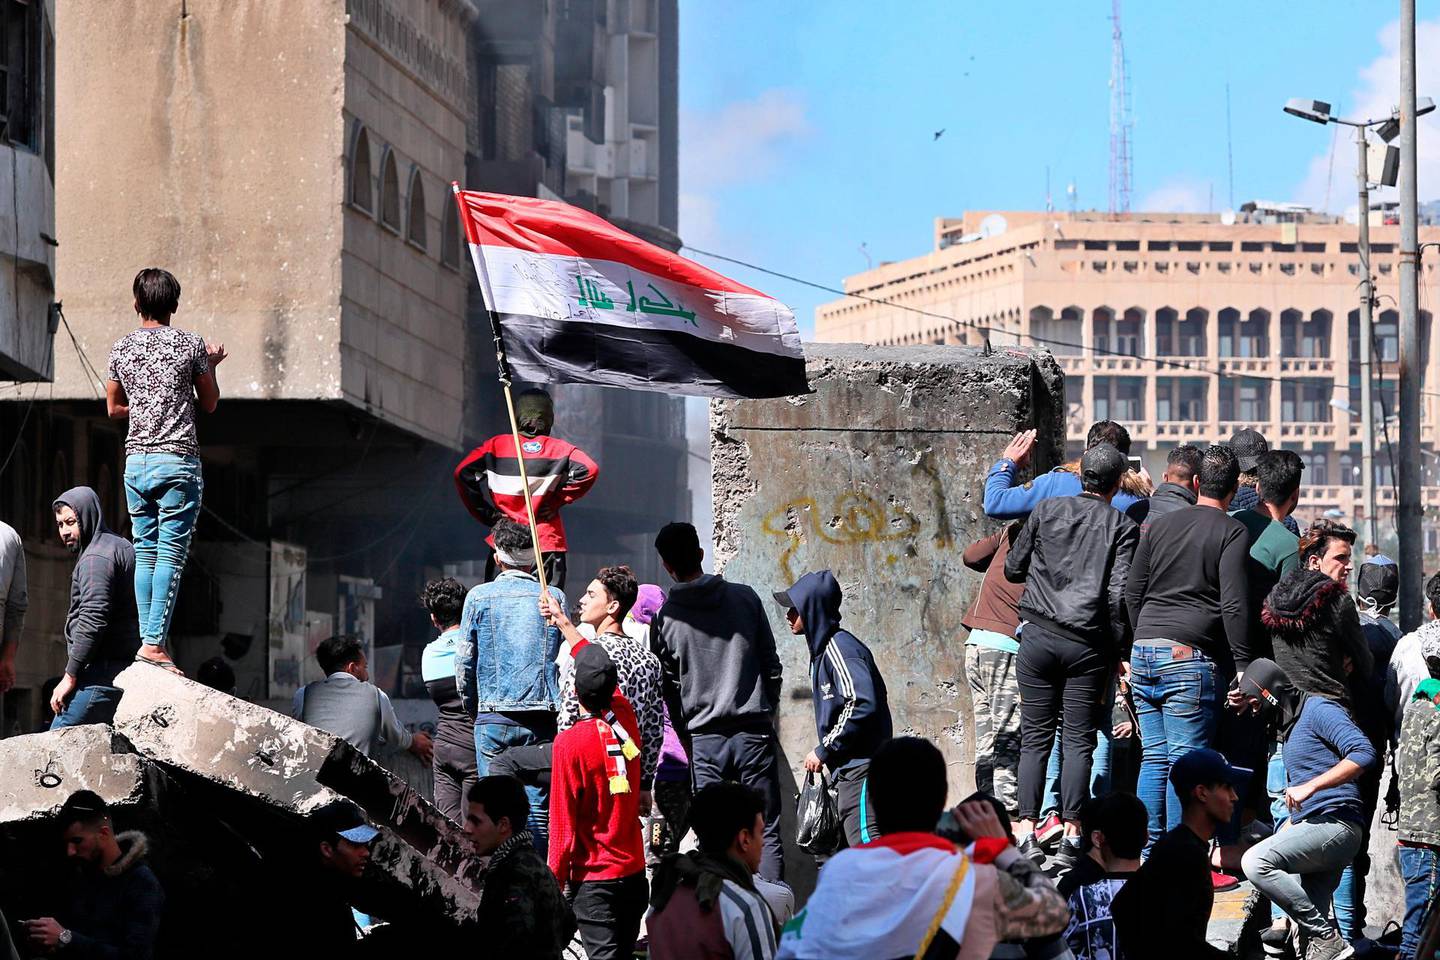 Protesters gather at barriers that block the protest site, in Baghdad, Iraq, Monday, March 2, 2020. (AP Photo/Hadi Mizban)